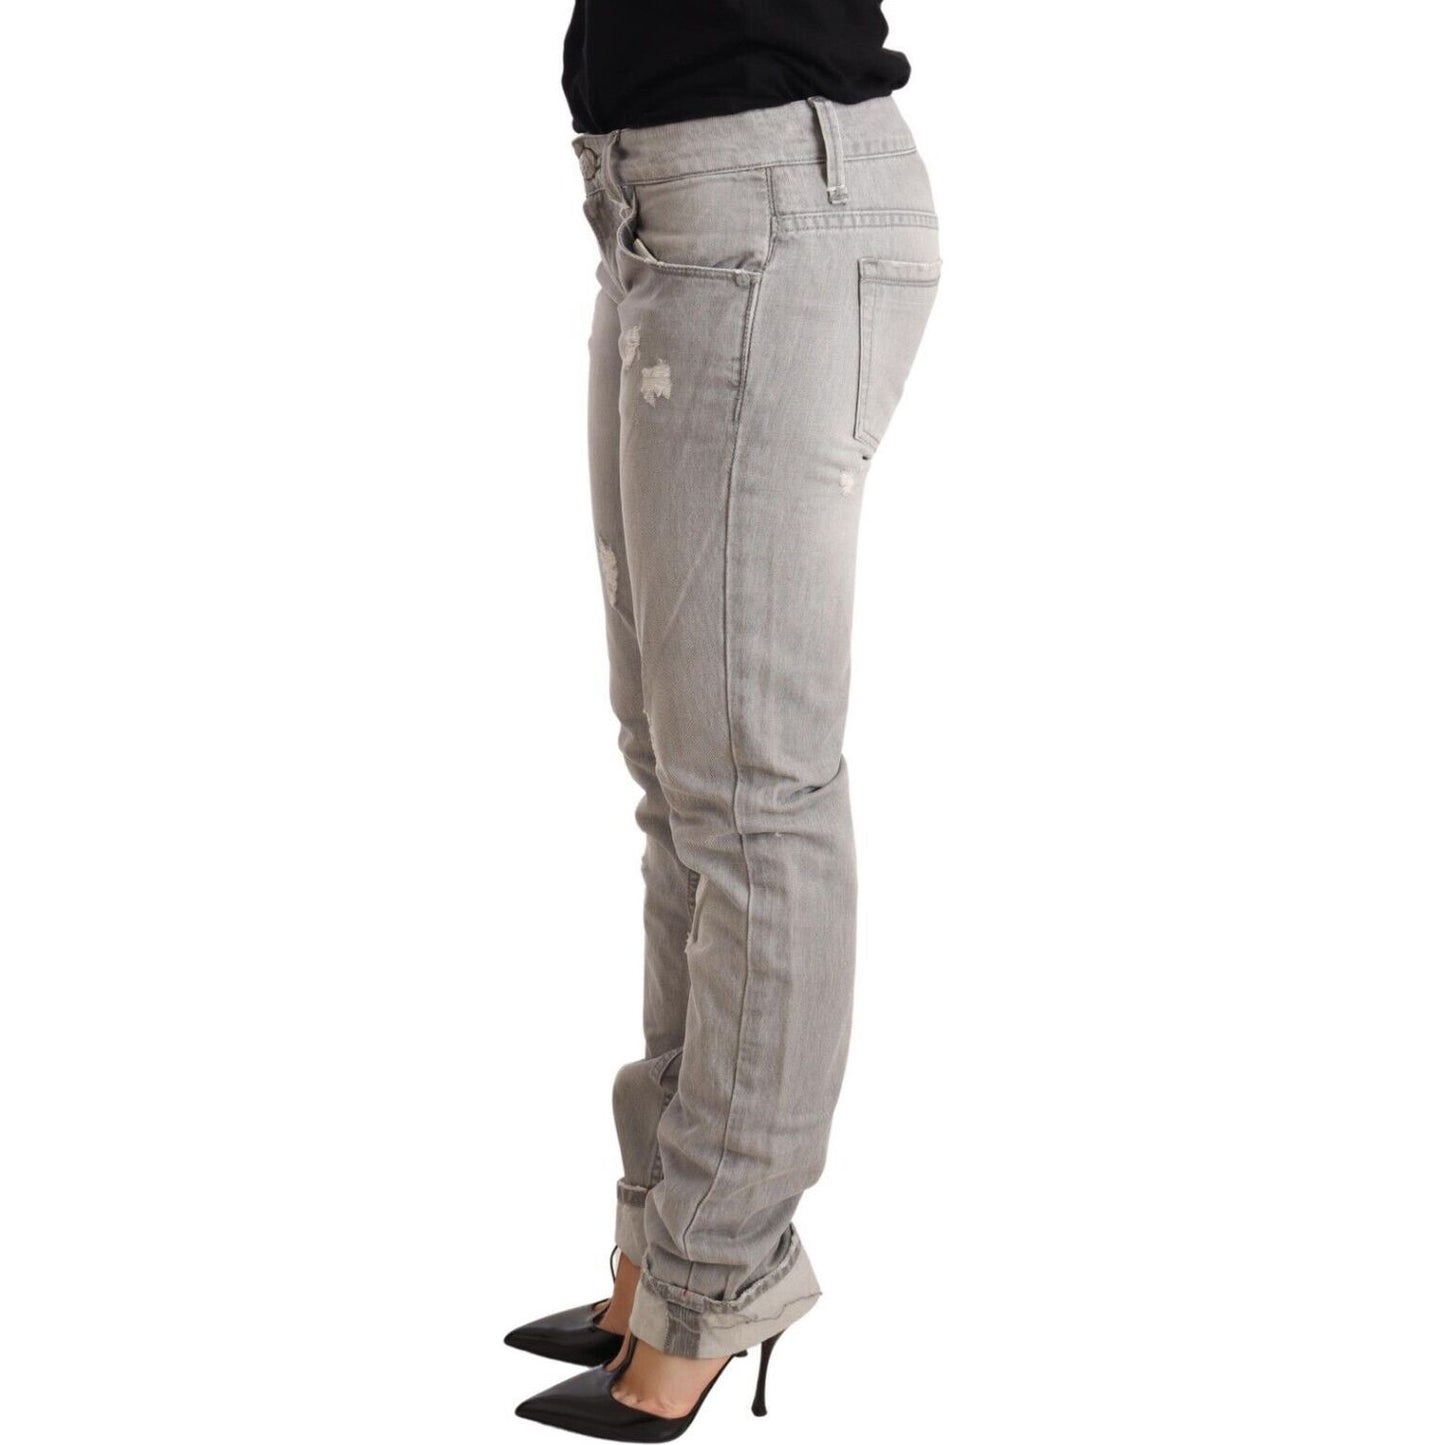 Acht Chic Slim Fit Tattered Gray Wash Jeans Jeans & Pants gray-tattered-cotton-slim-fit-folded-hem-women-denim-jeans